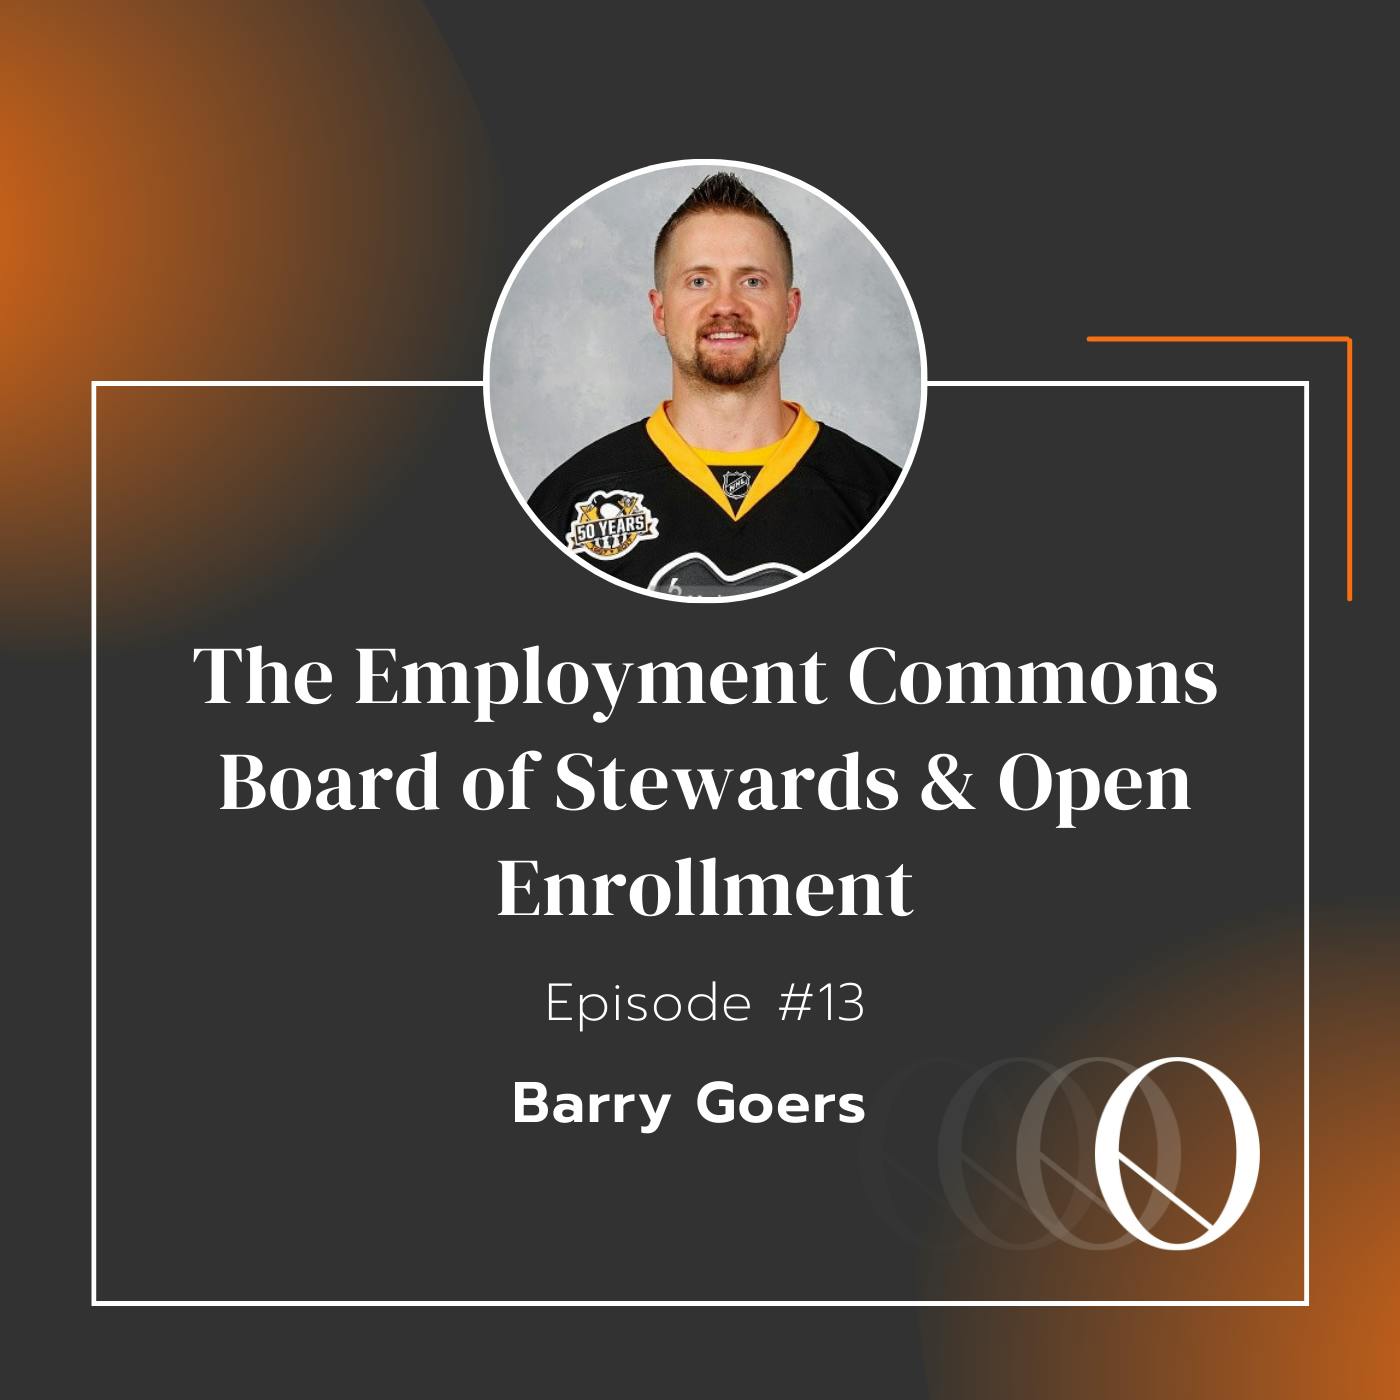 Episode 13: The Employment Commons Board of Stewards & Open Enrollment with Barry Goers